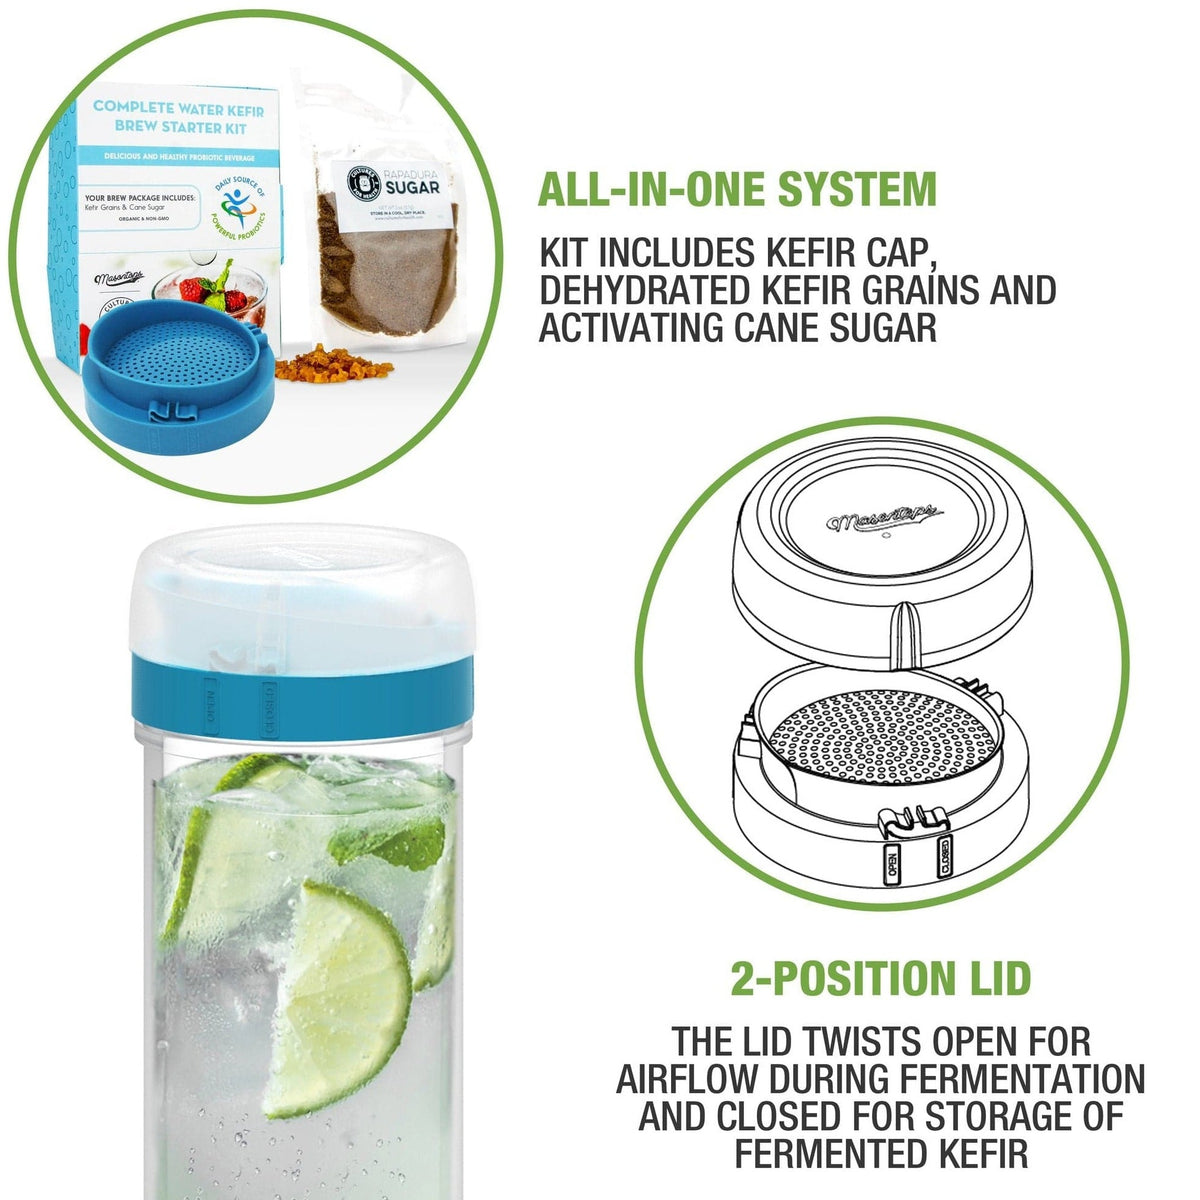 A complete water kefir starter kit with kefir cap, dehydrated kefir grains, and activating cane sugar. It also has a glass filled with water and lime with a twistable lid which opens for airflow during fermentation and closes for storage of fermented kefir.